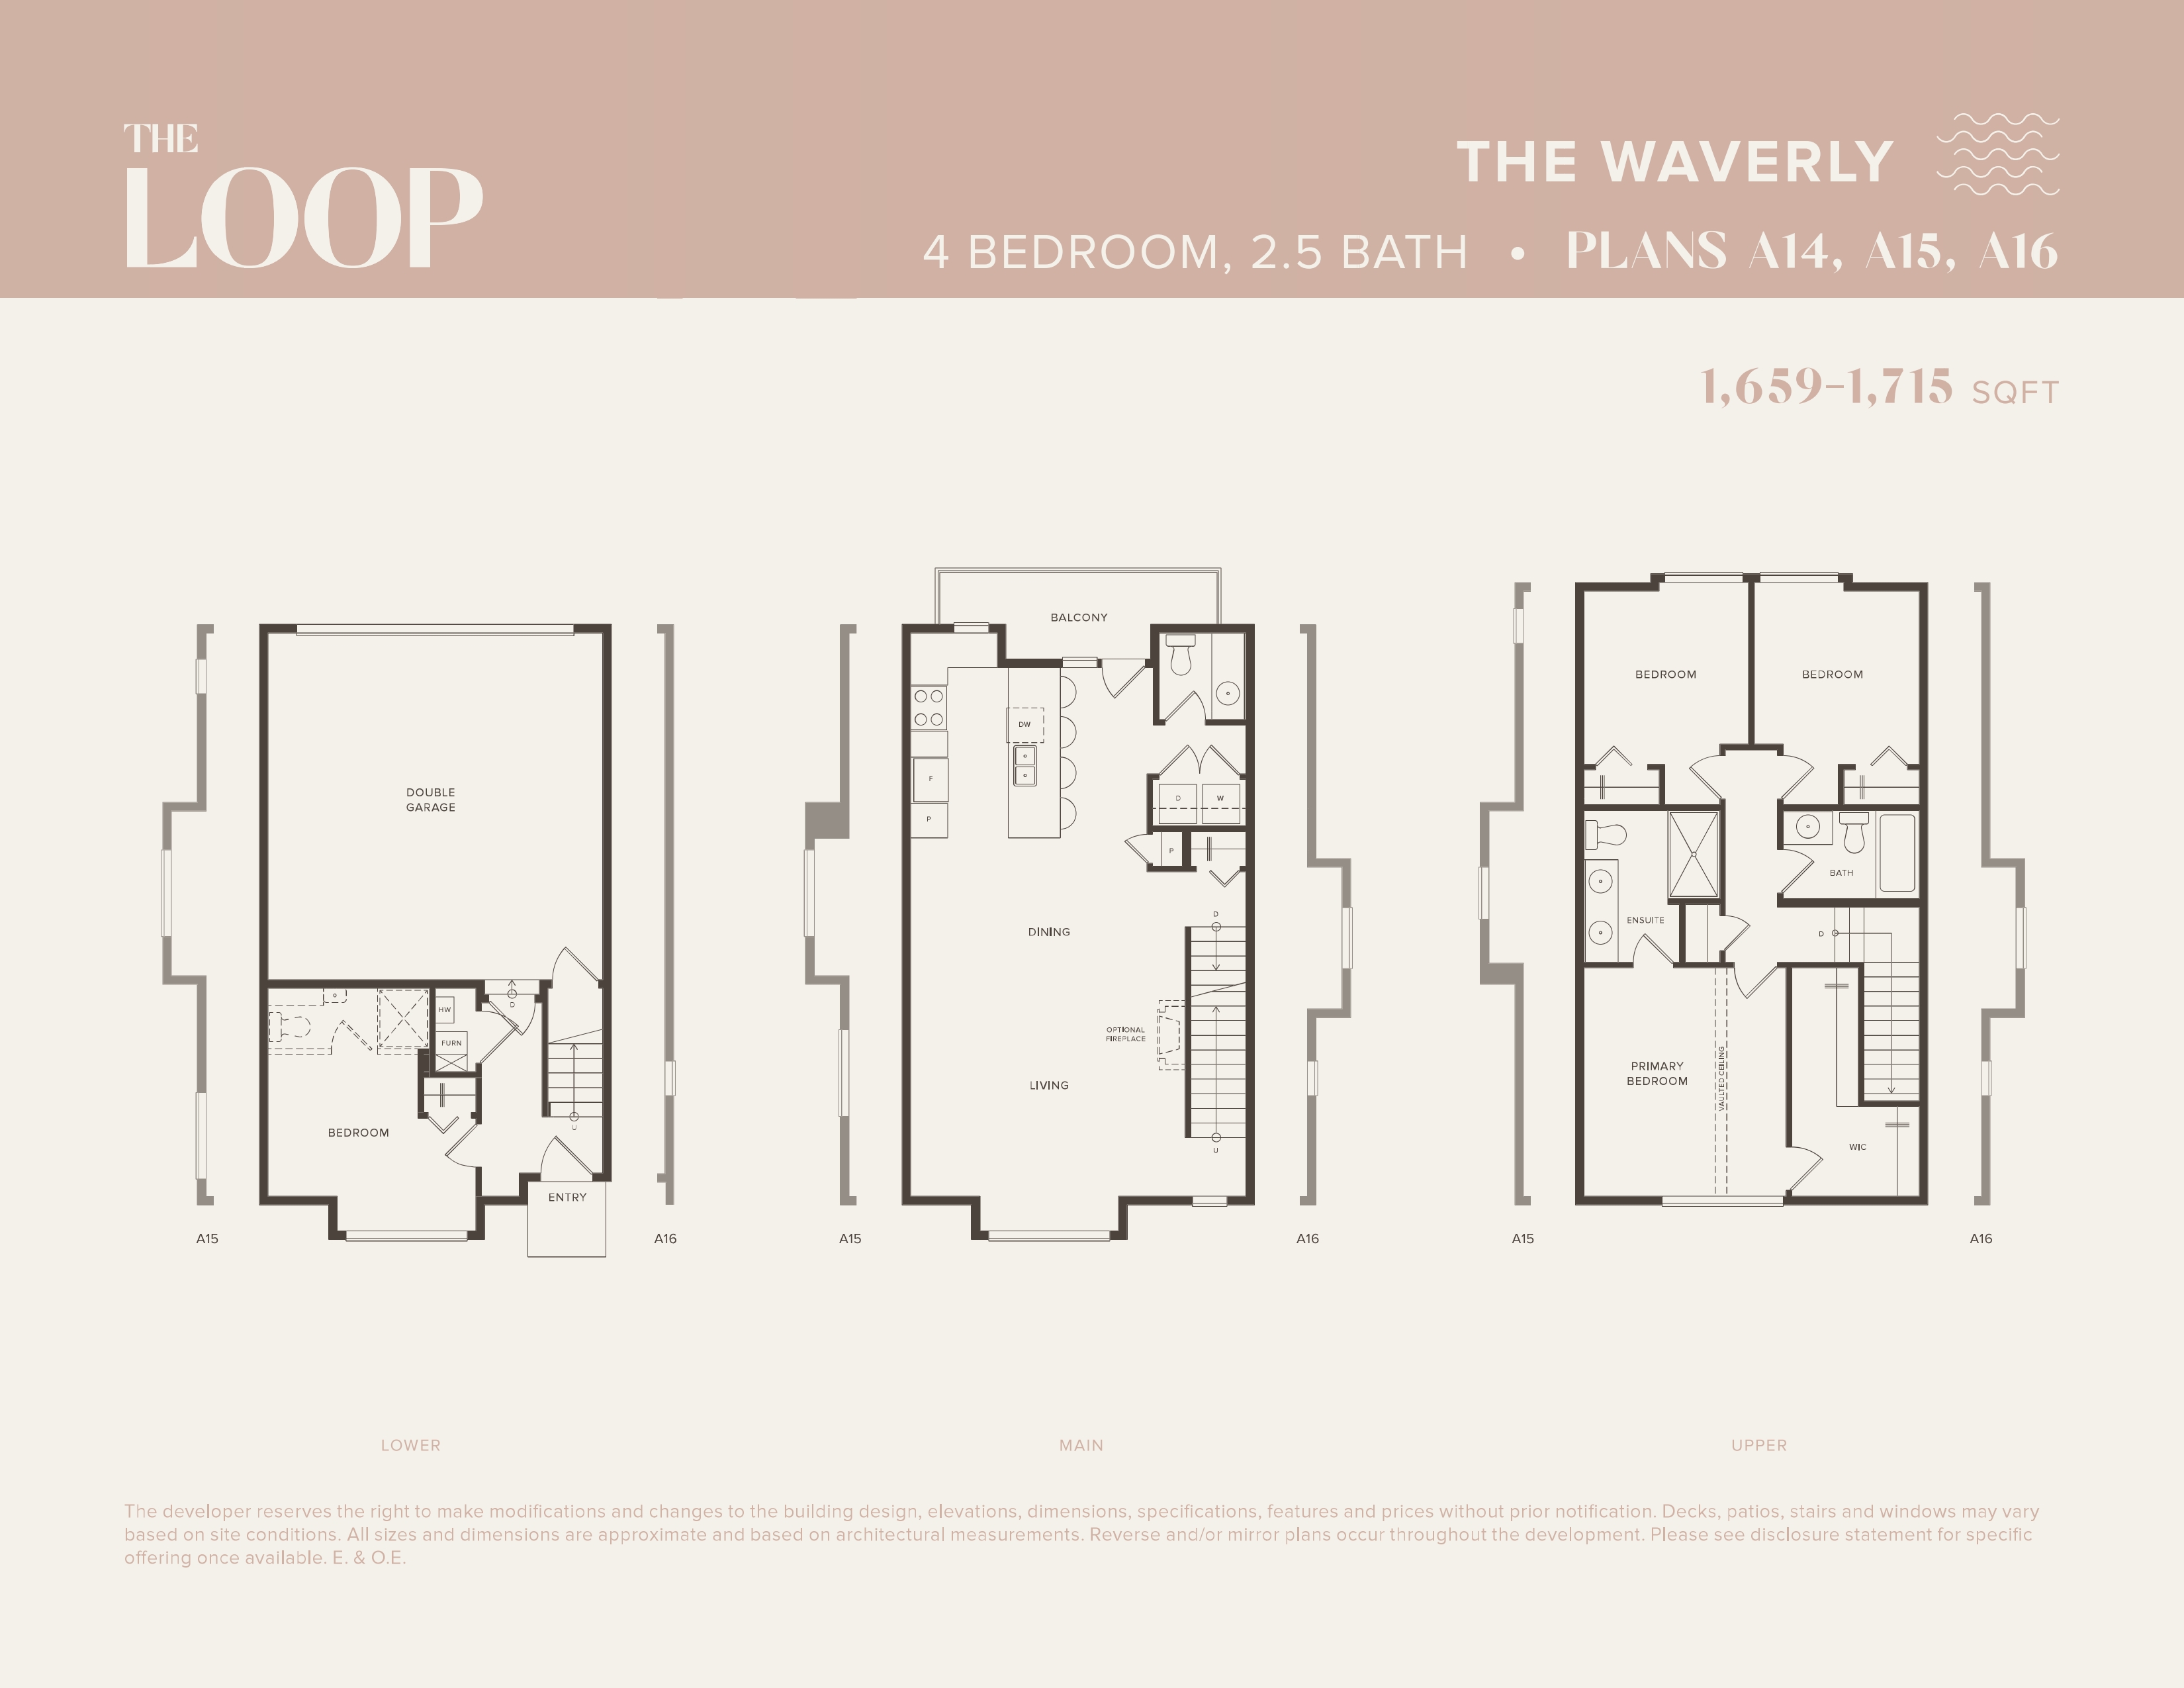  The Waverly  Floor Plan of The Loop Towns with undefined beds